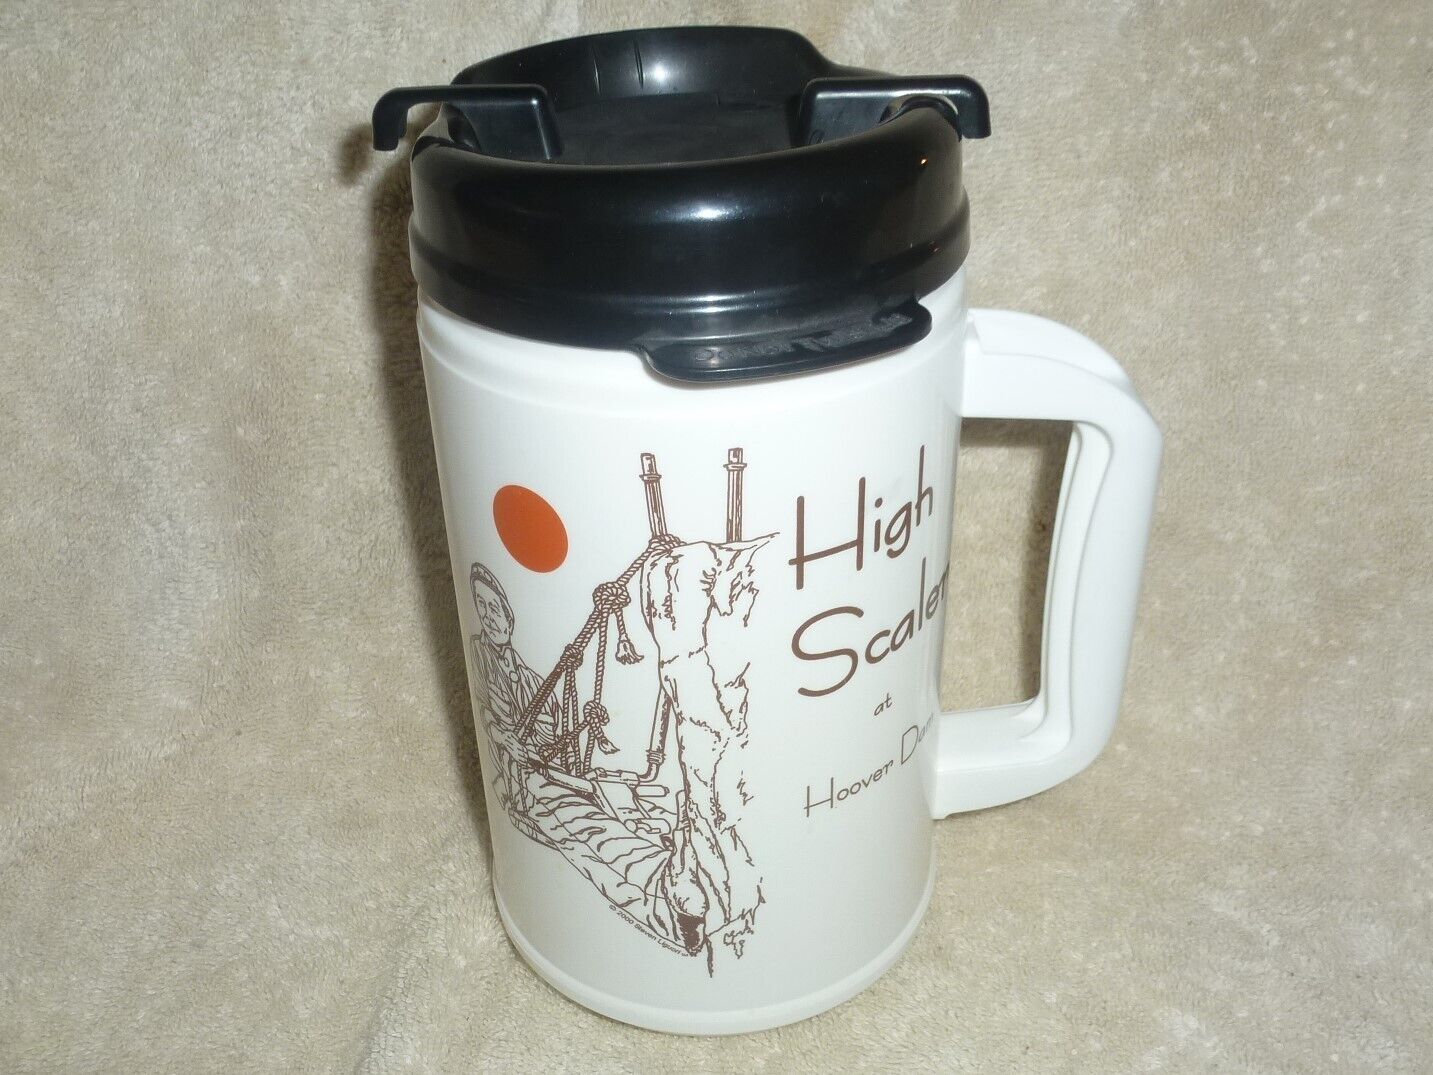 WHIRLEY Drink Works Hoover Dam NEVADA High Scaler 32oz. Travel Cup Hot Cold Rare